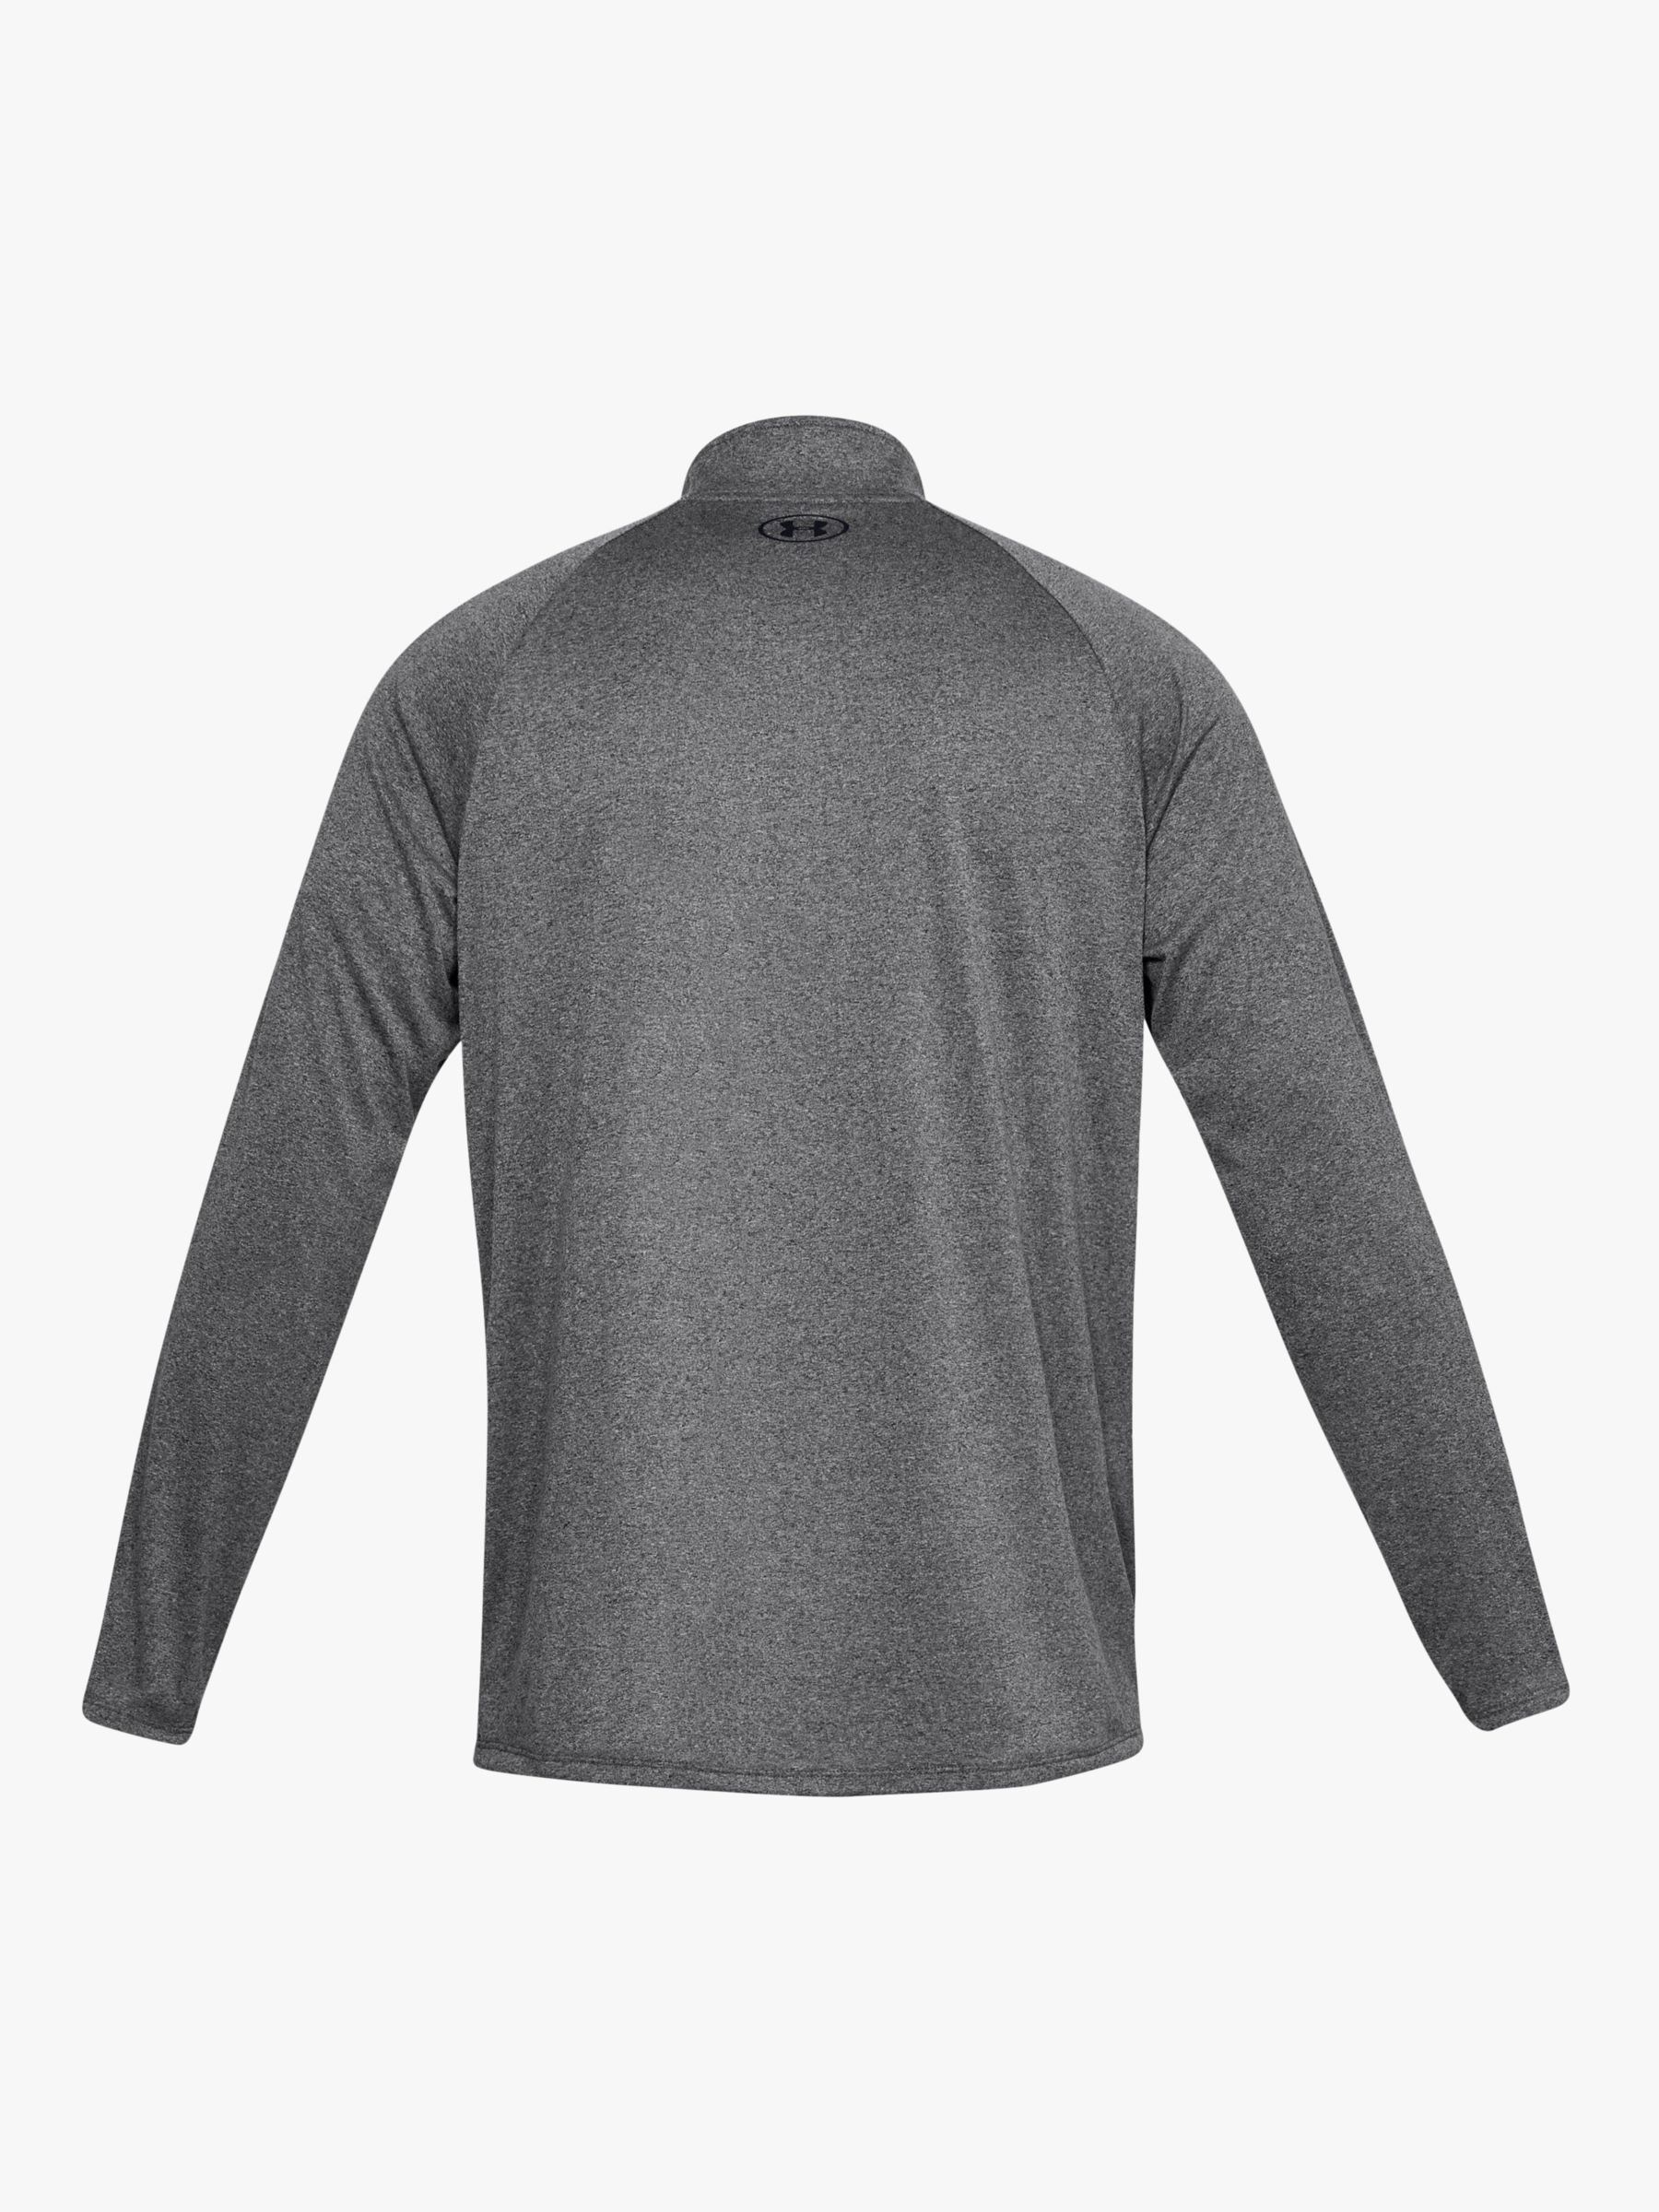 Buy Under Armour Tech 2.0 1/2 Zip Long Sleeve Gym Top Online at johnlewis.com